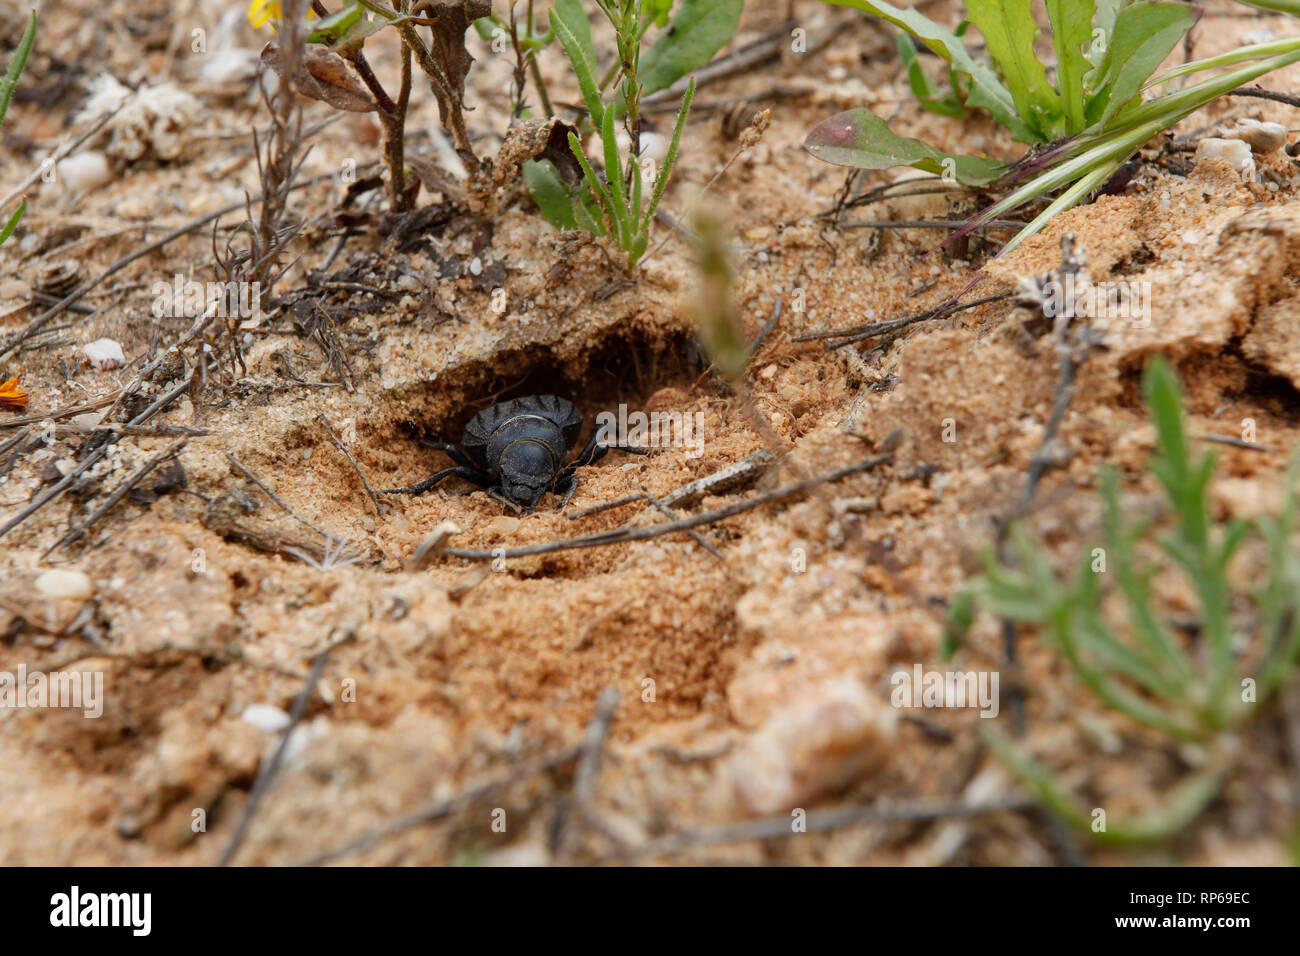 A beetle dig a hole in the ground, so he can find protection in his refuge. Stock Photo